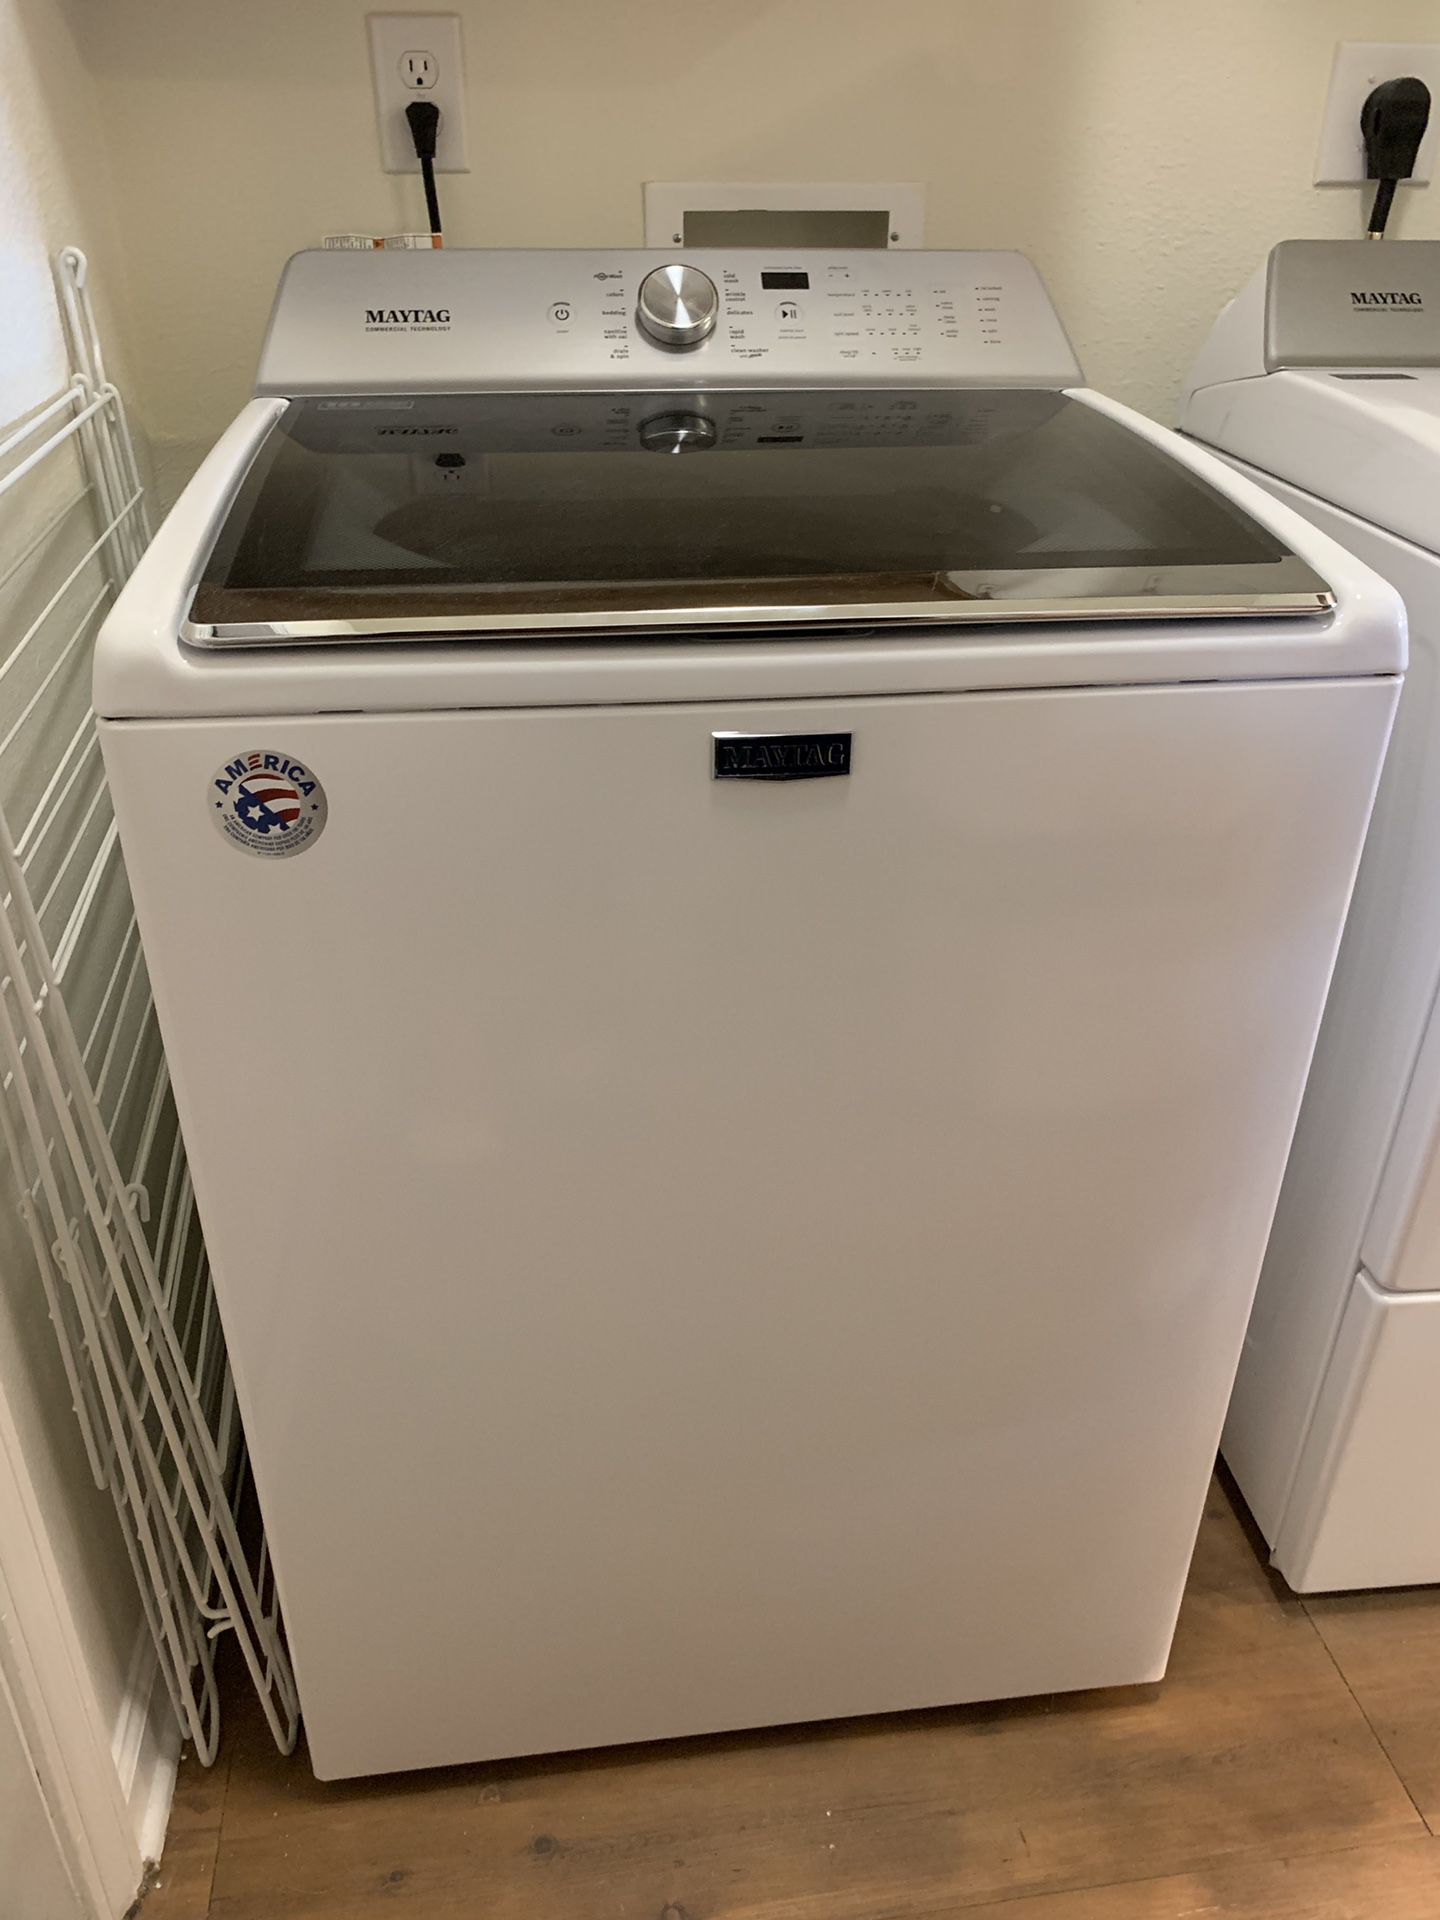 MAYTAG Washer and Dryer